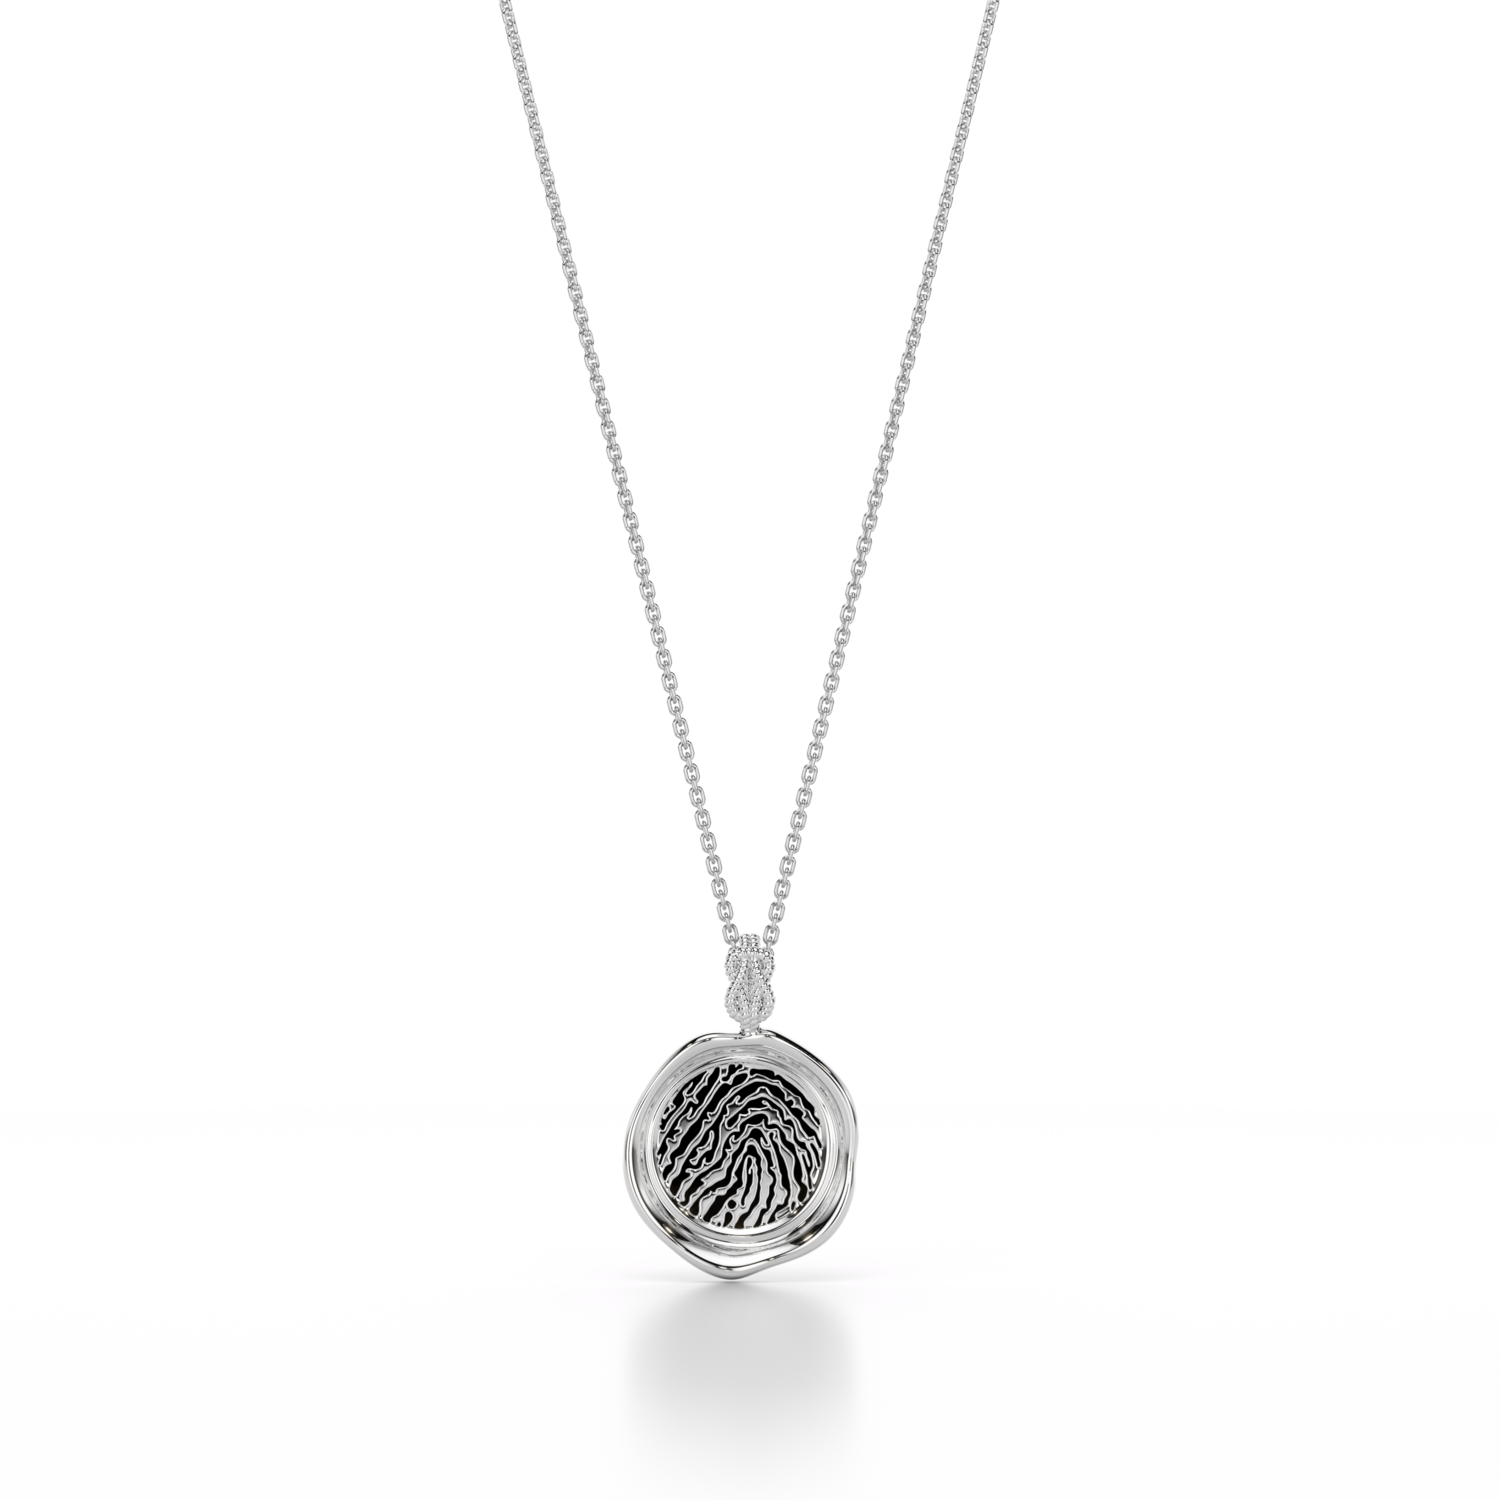 Forever-with-You Medium Round Sterling Silver Seal Necklace.